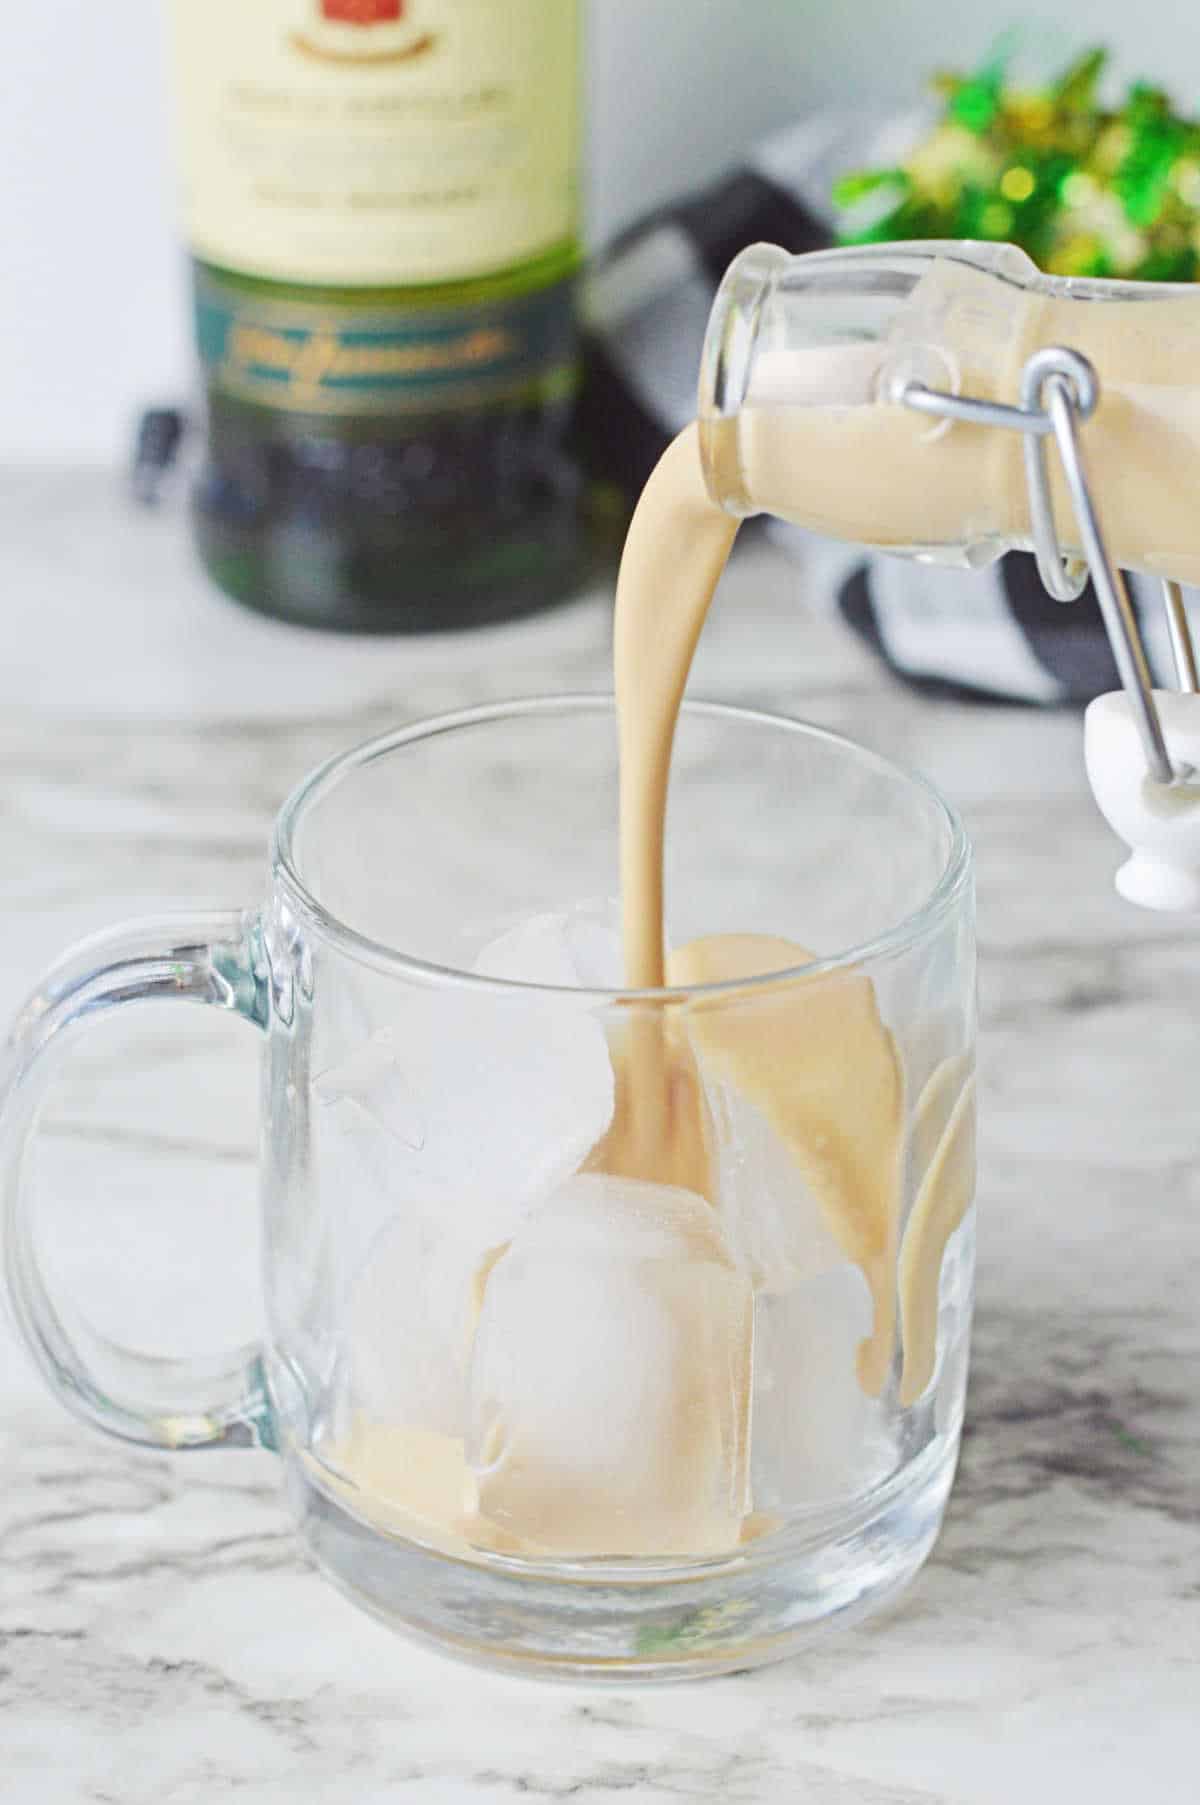 A glass bottle pouring homemade Irish cream into a glass with ice.